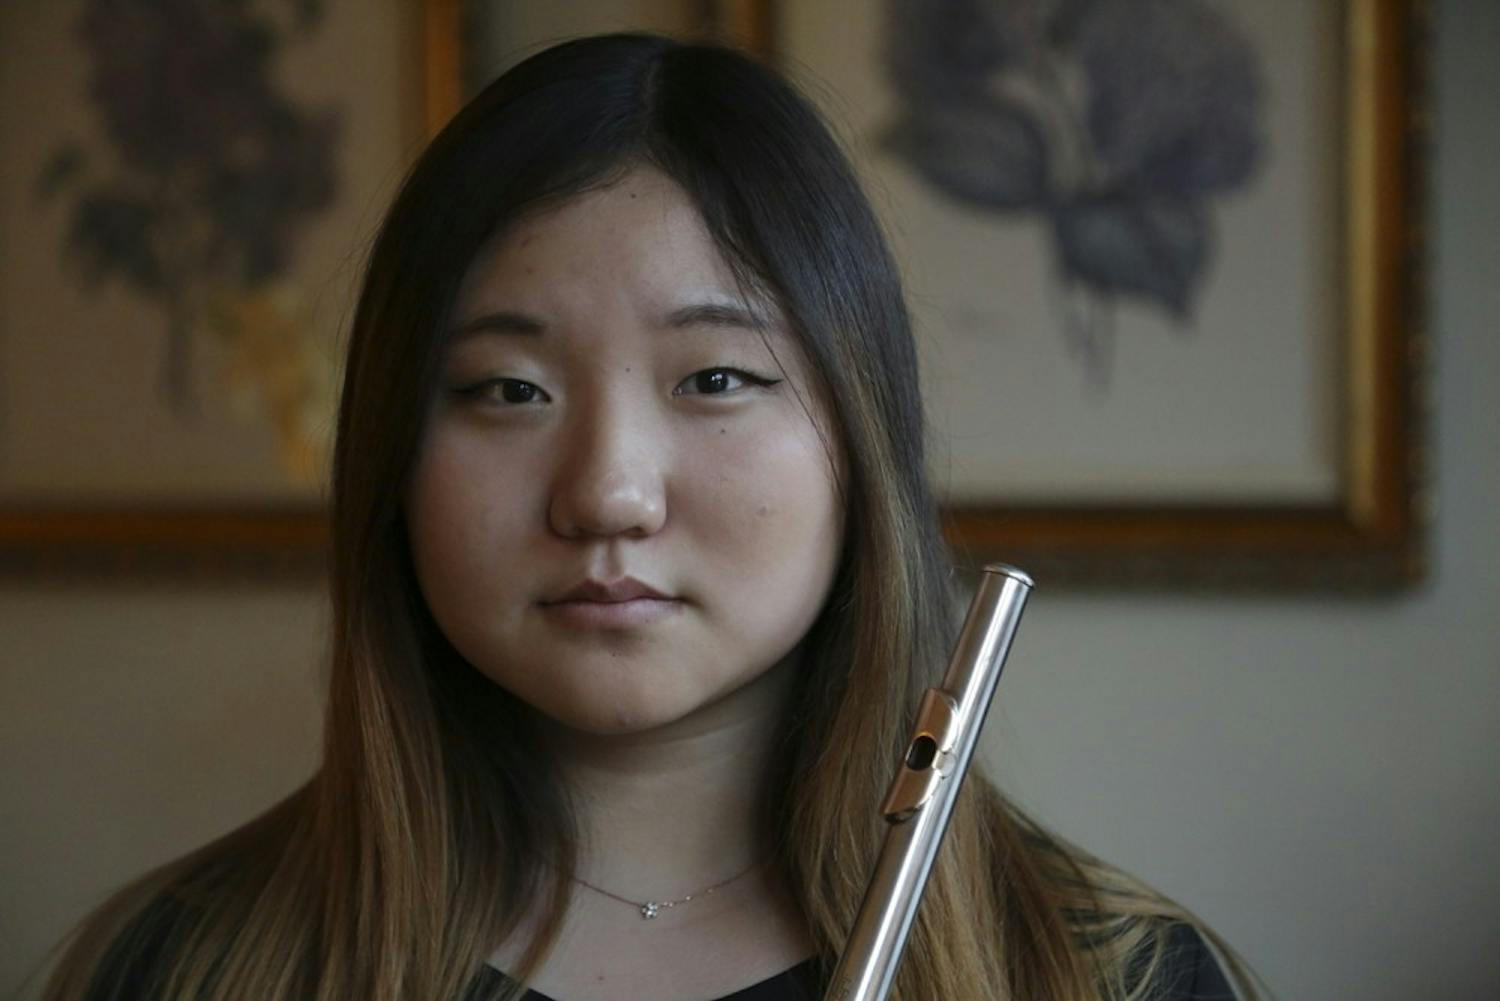 Cecilia Lee is a flautist and student at East Chapel Hill High School. She will perform in Carnegie Hall in February with other students.